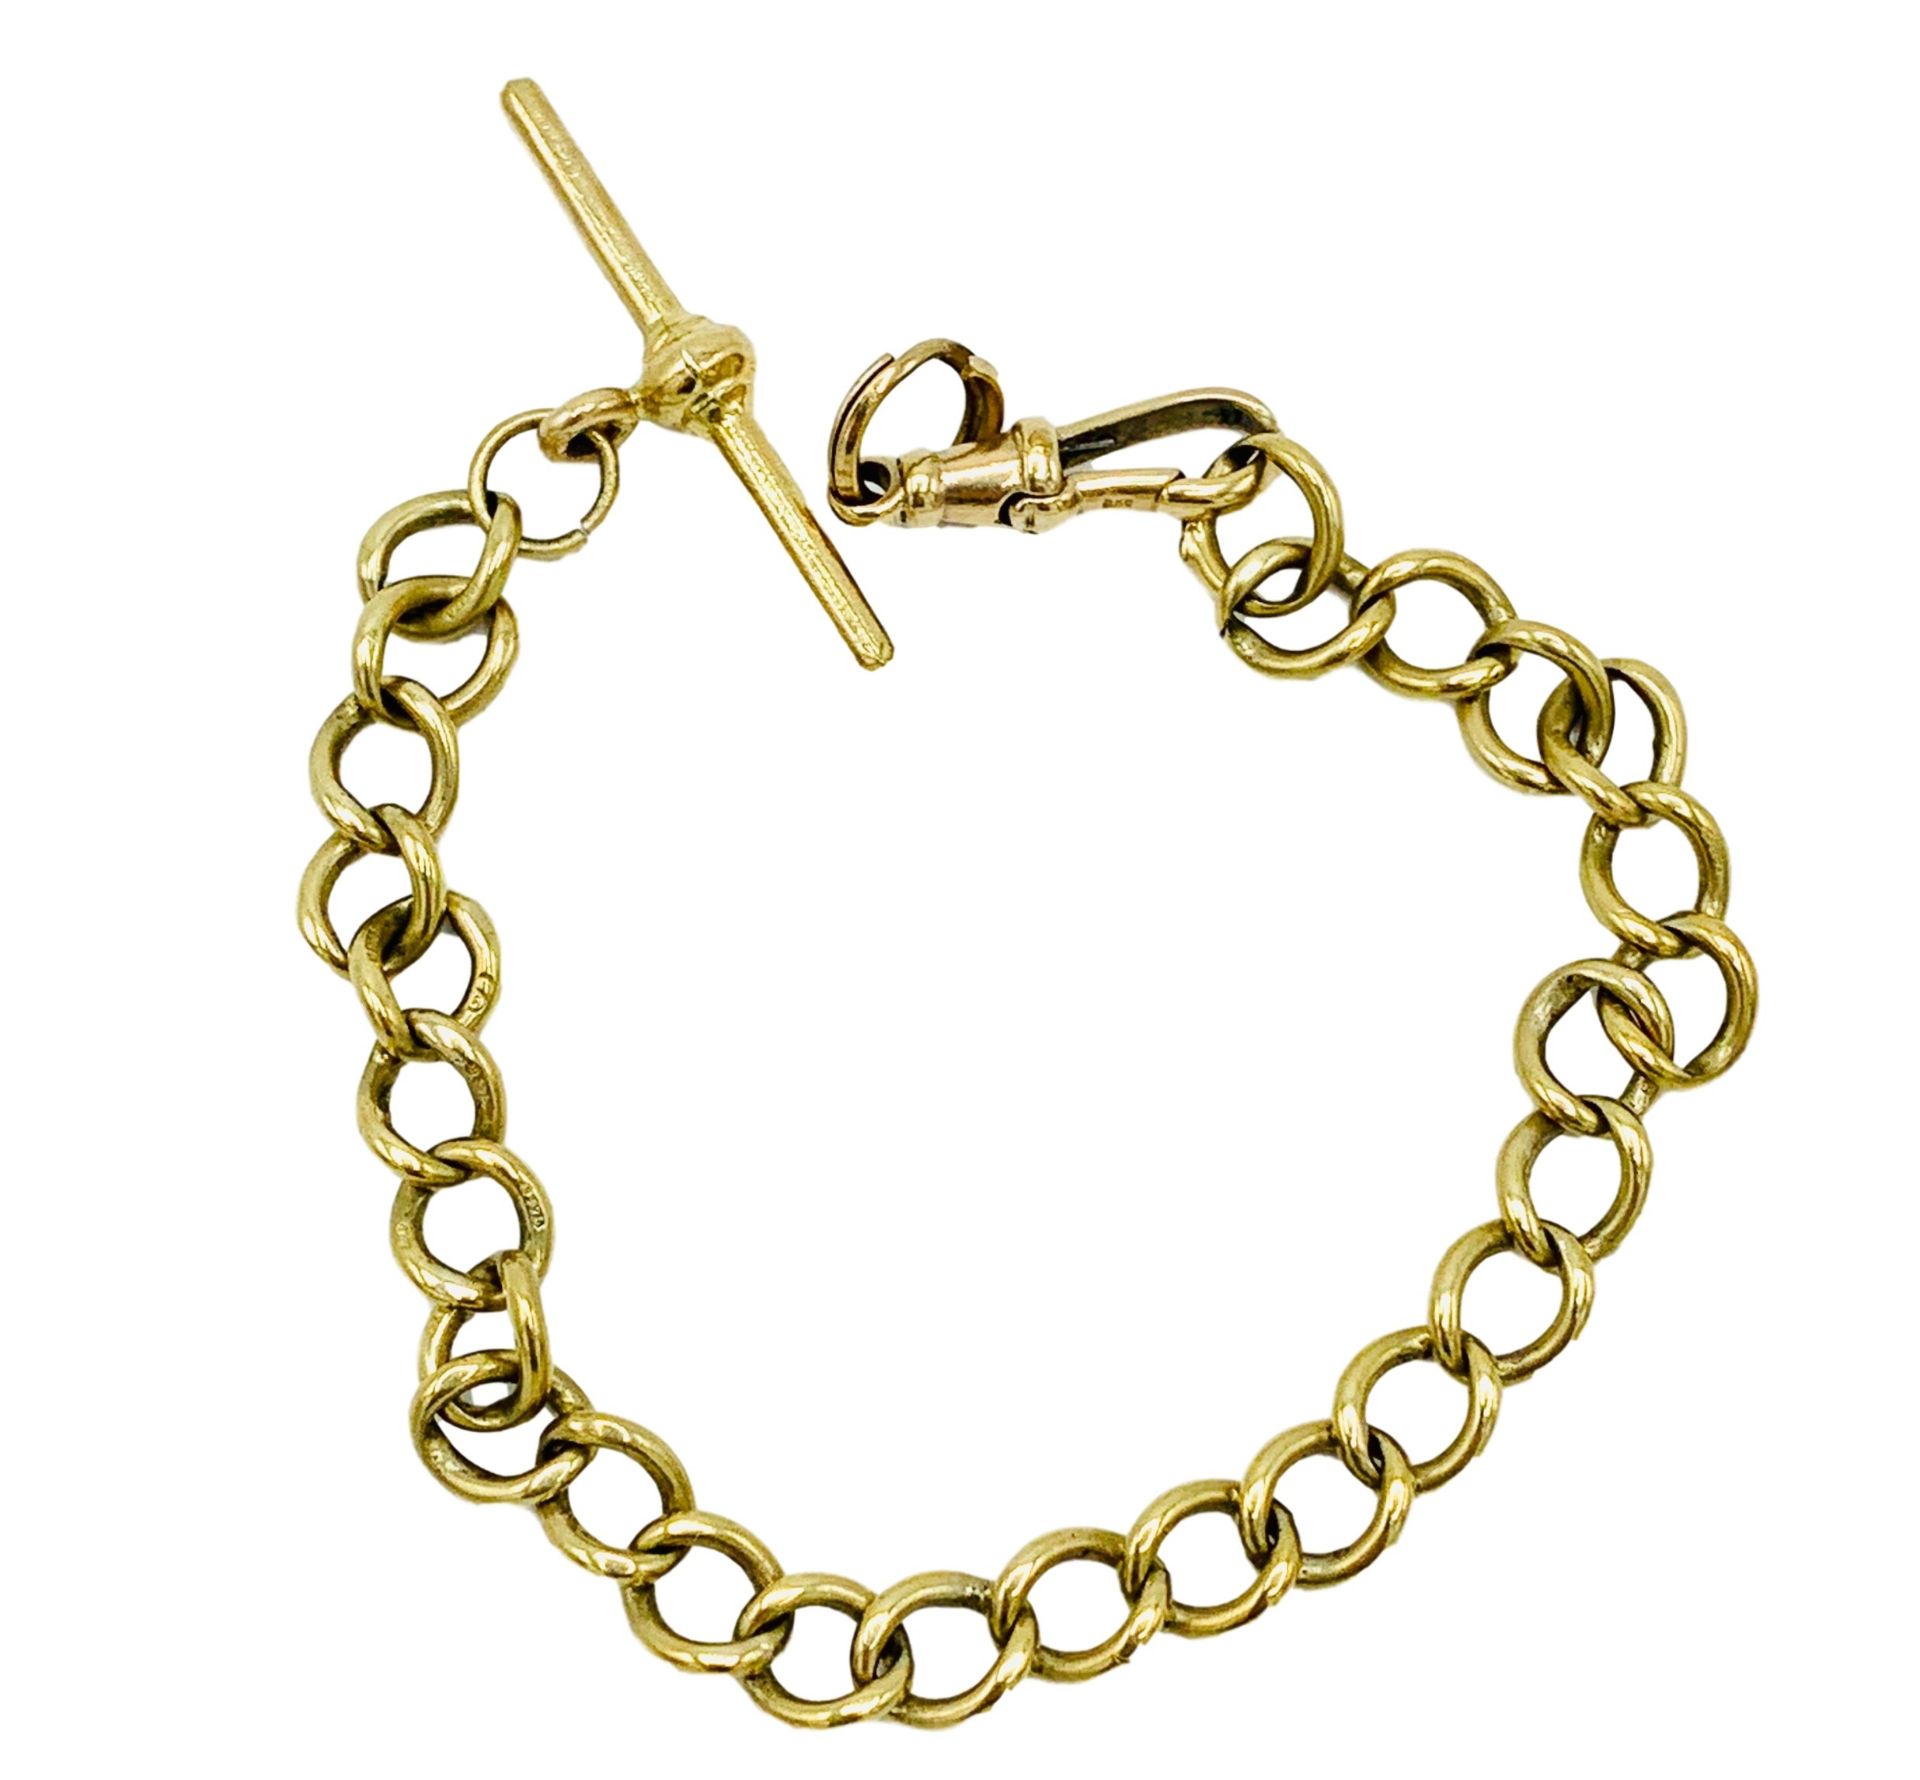 9ct gold fob chain.